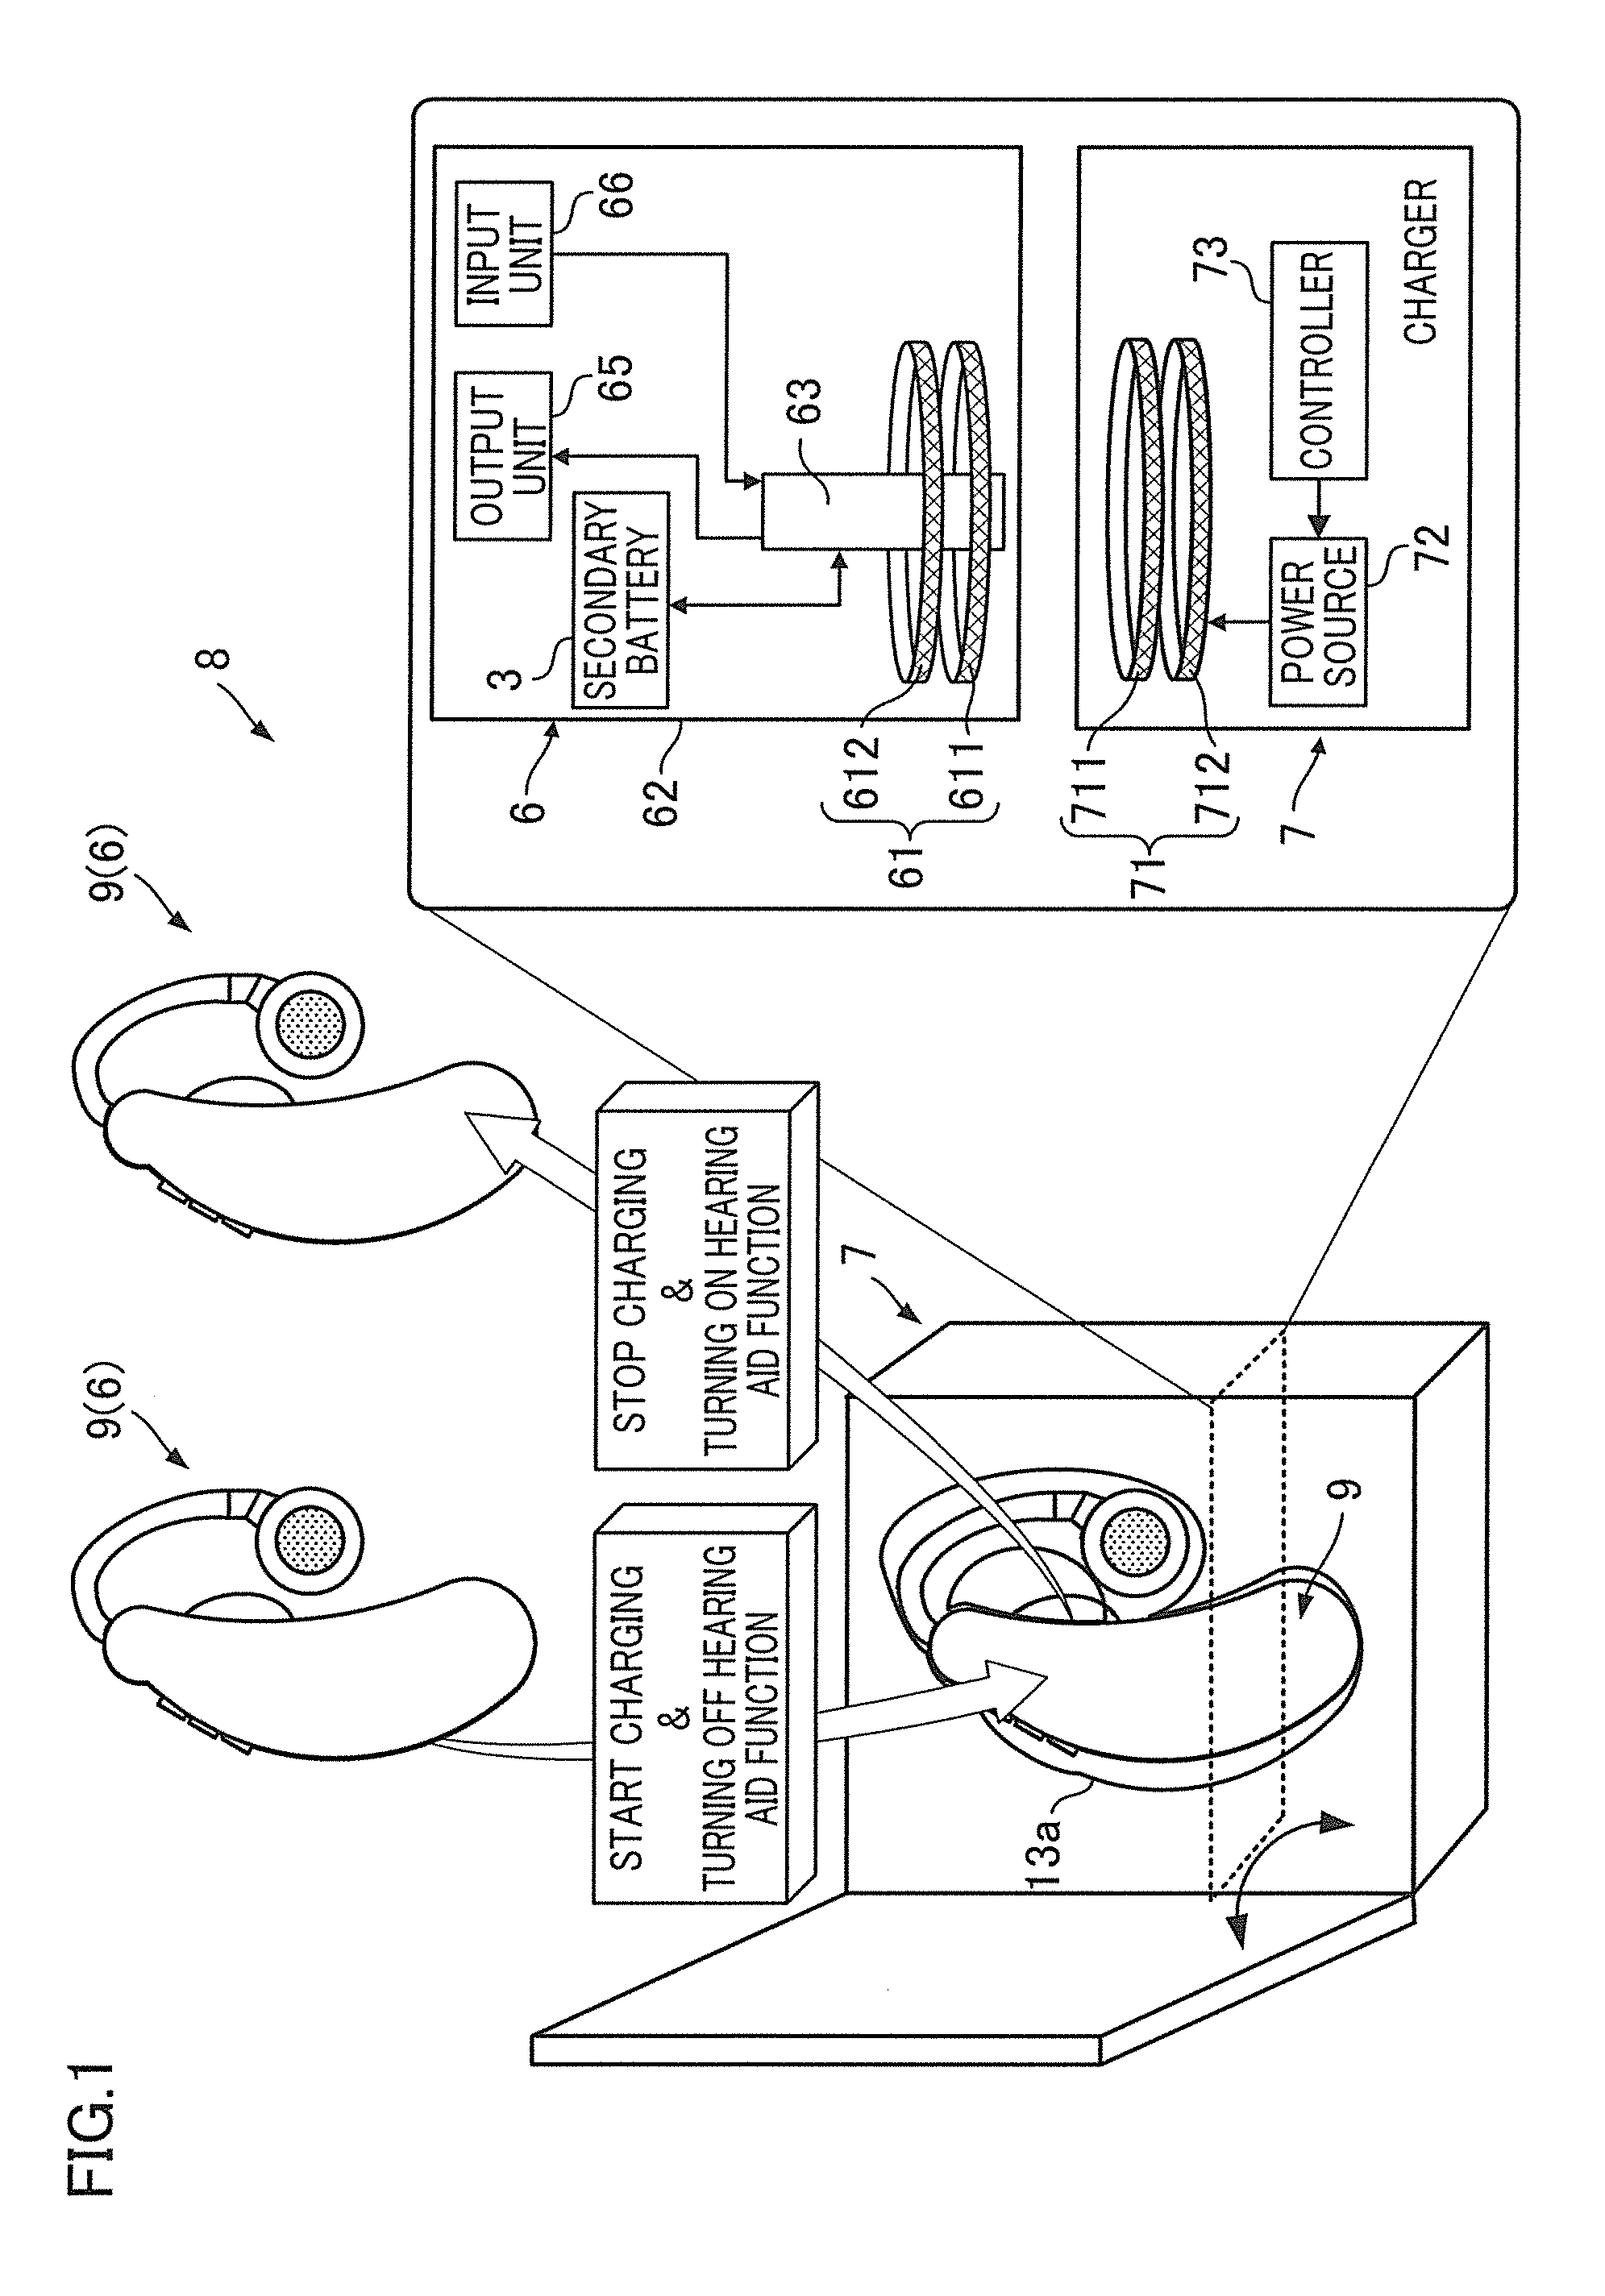 Portable device, charging system, and power source circuit substrate